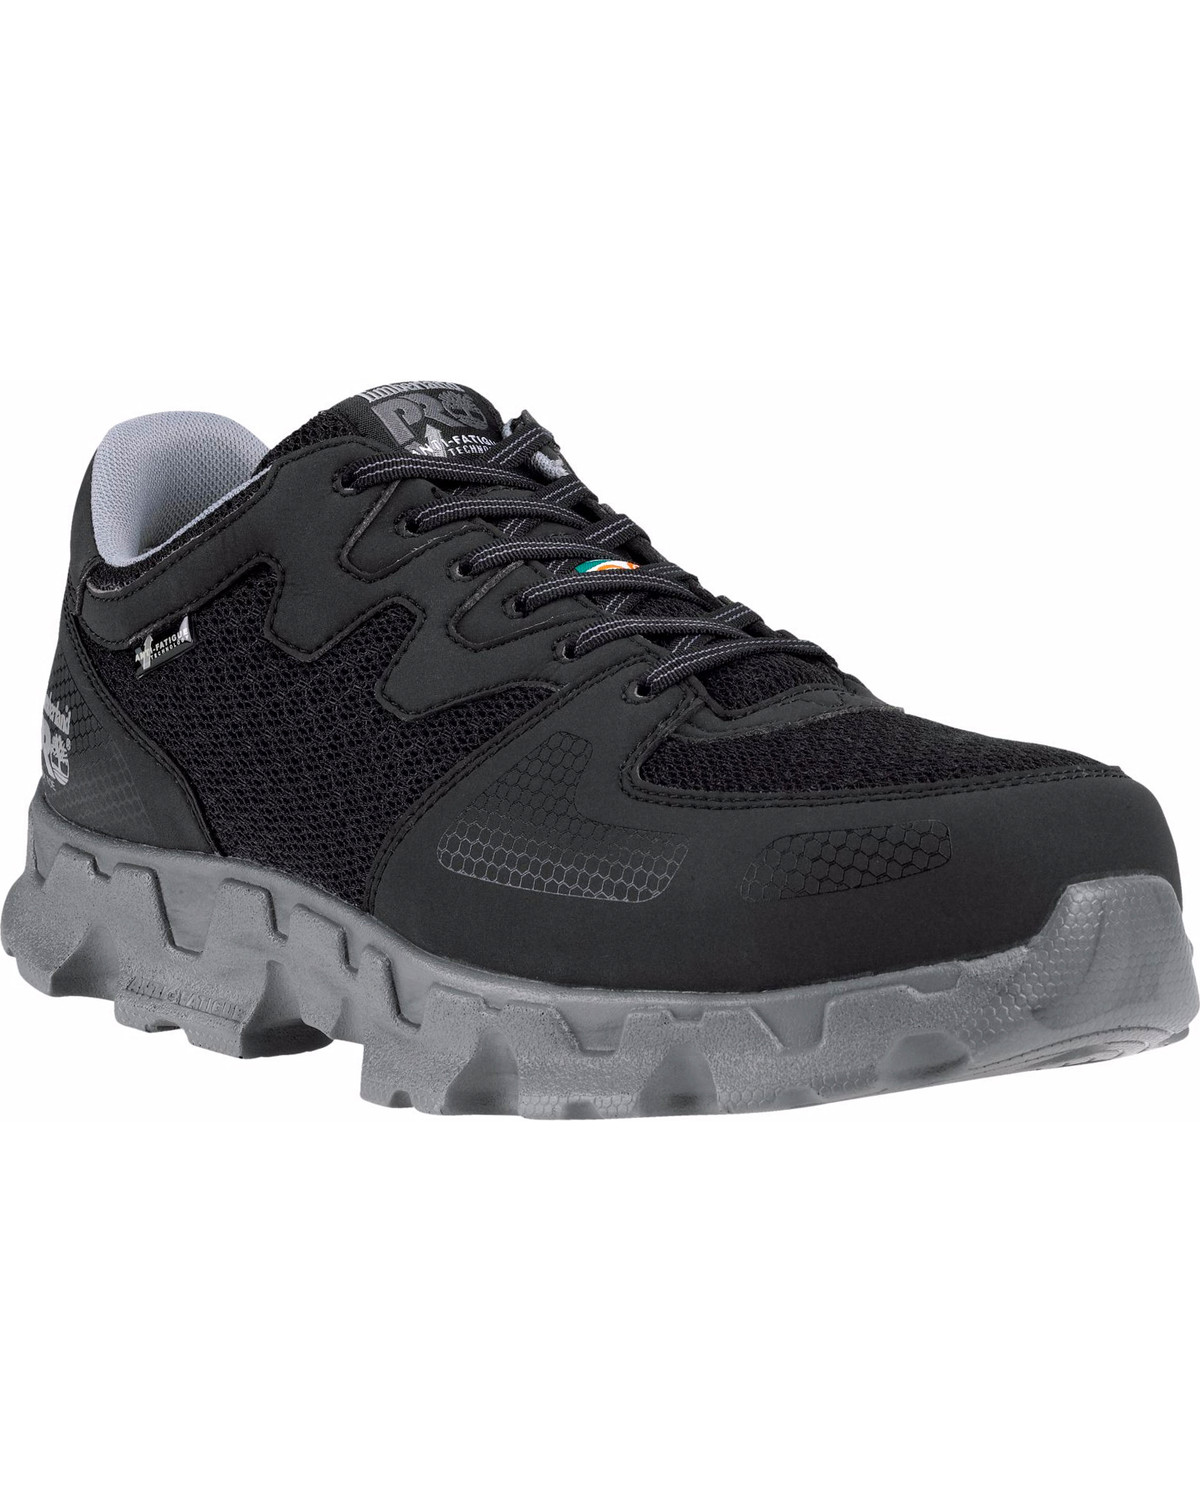 Timberland PRO Men's Powertrain ESD Work Shoes - Alloy Toe